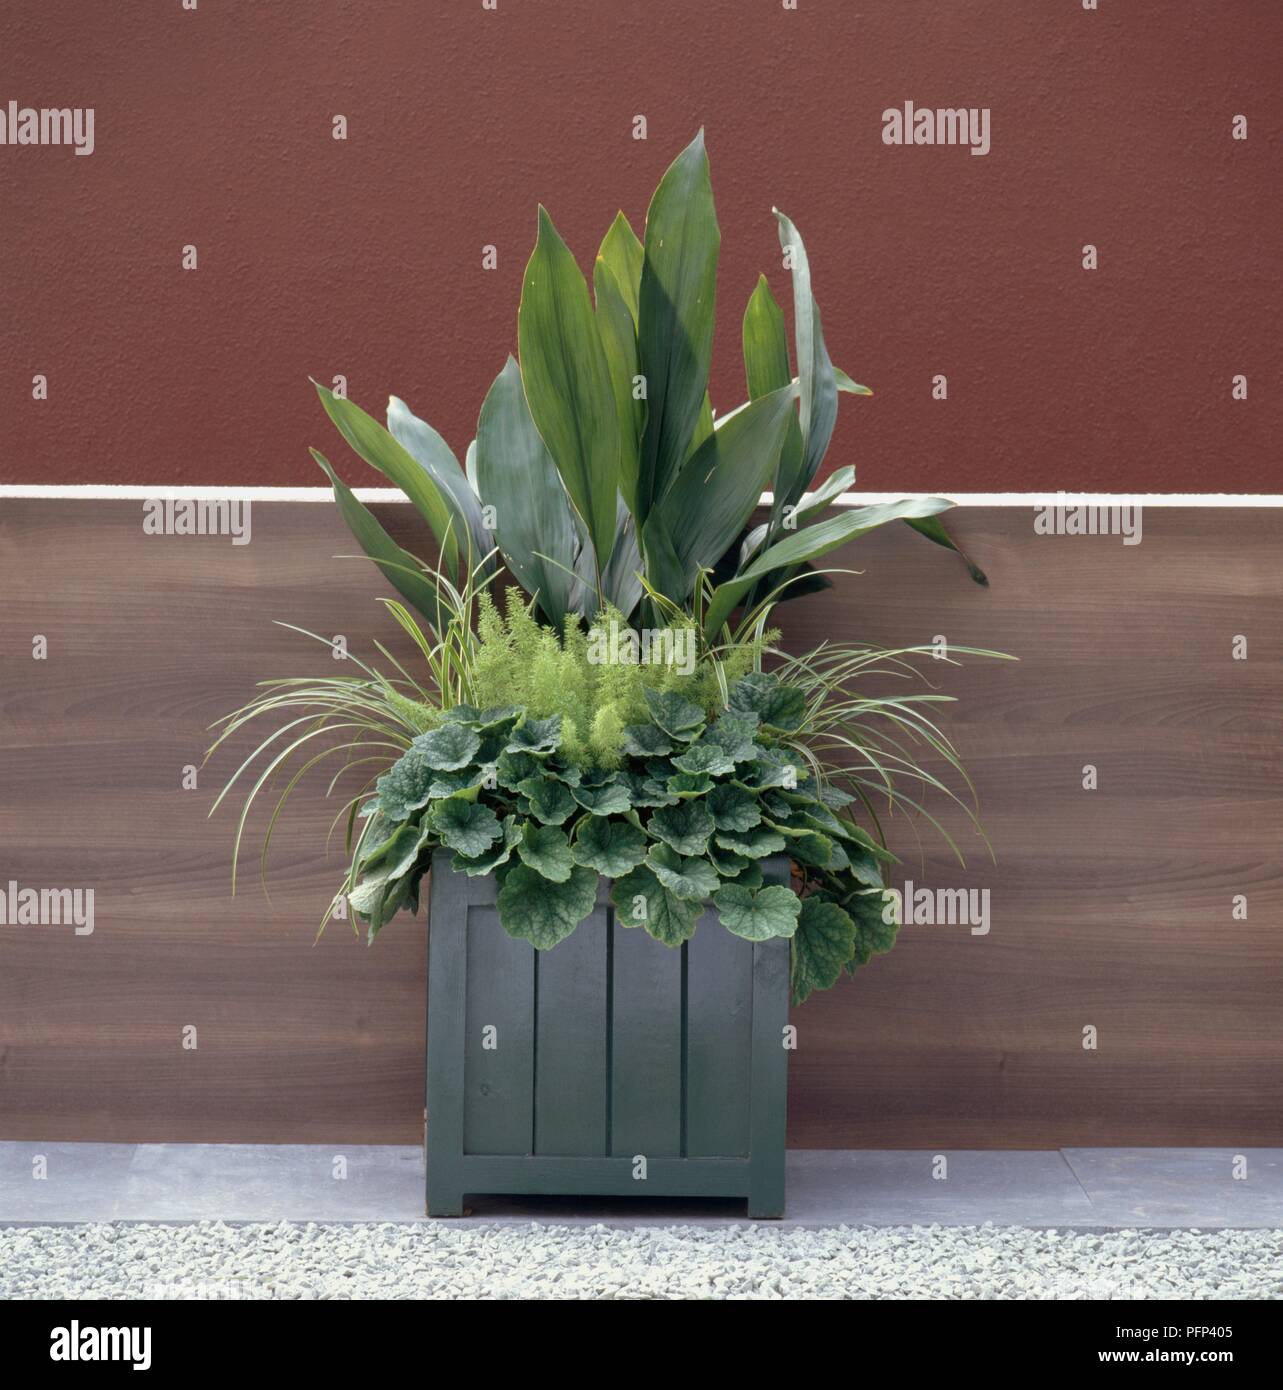 Fern, grass and aspidistra leaves in container Stock Photo